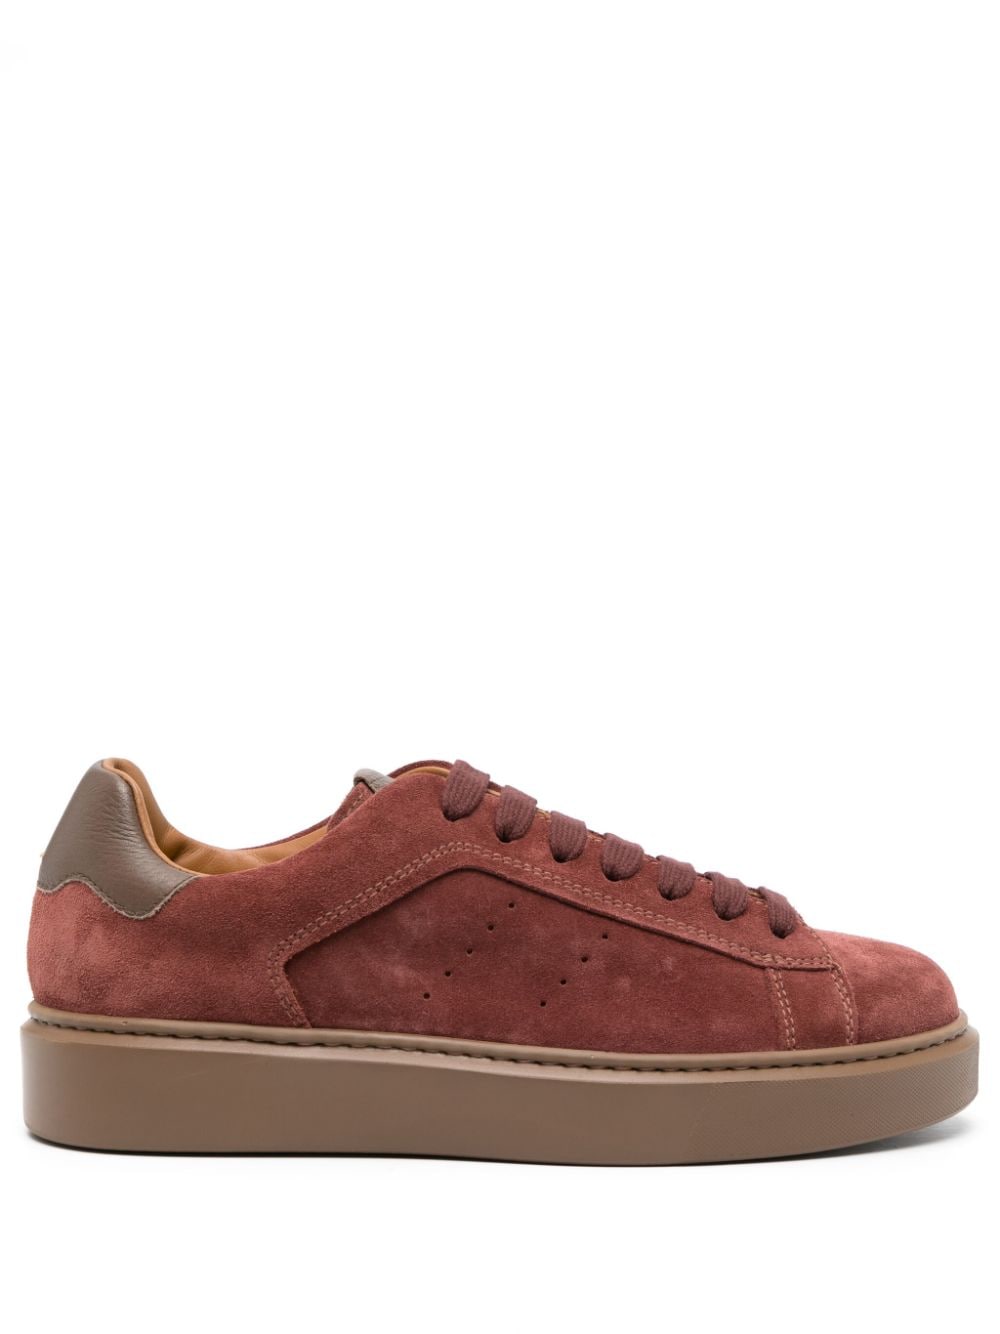 Doucal's lace-up suede sneakers - Red von Doucal's